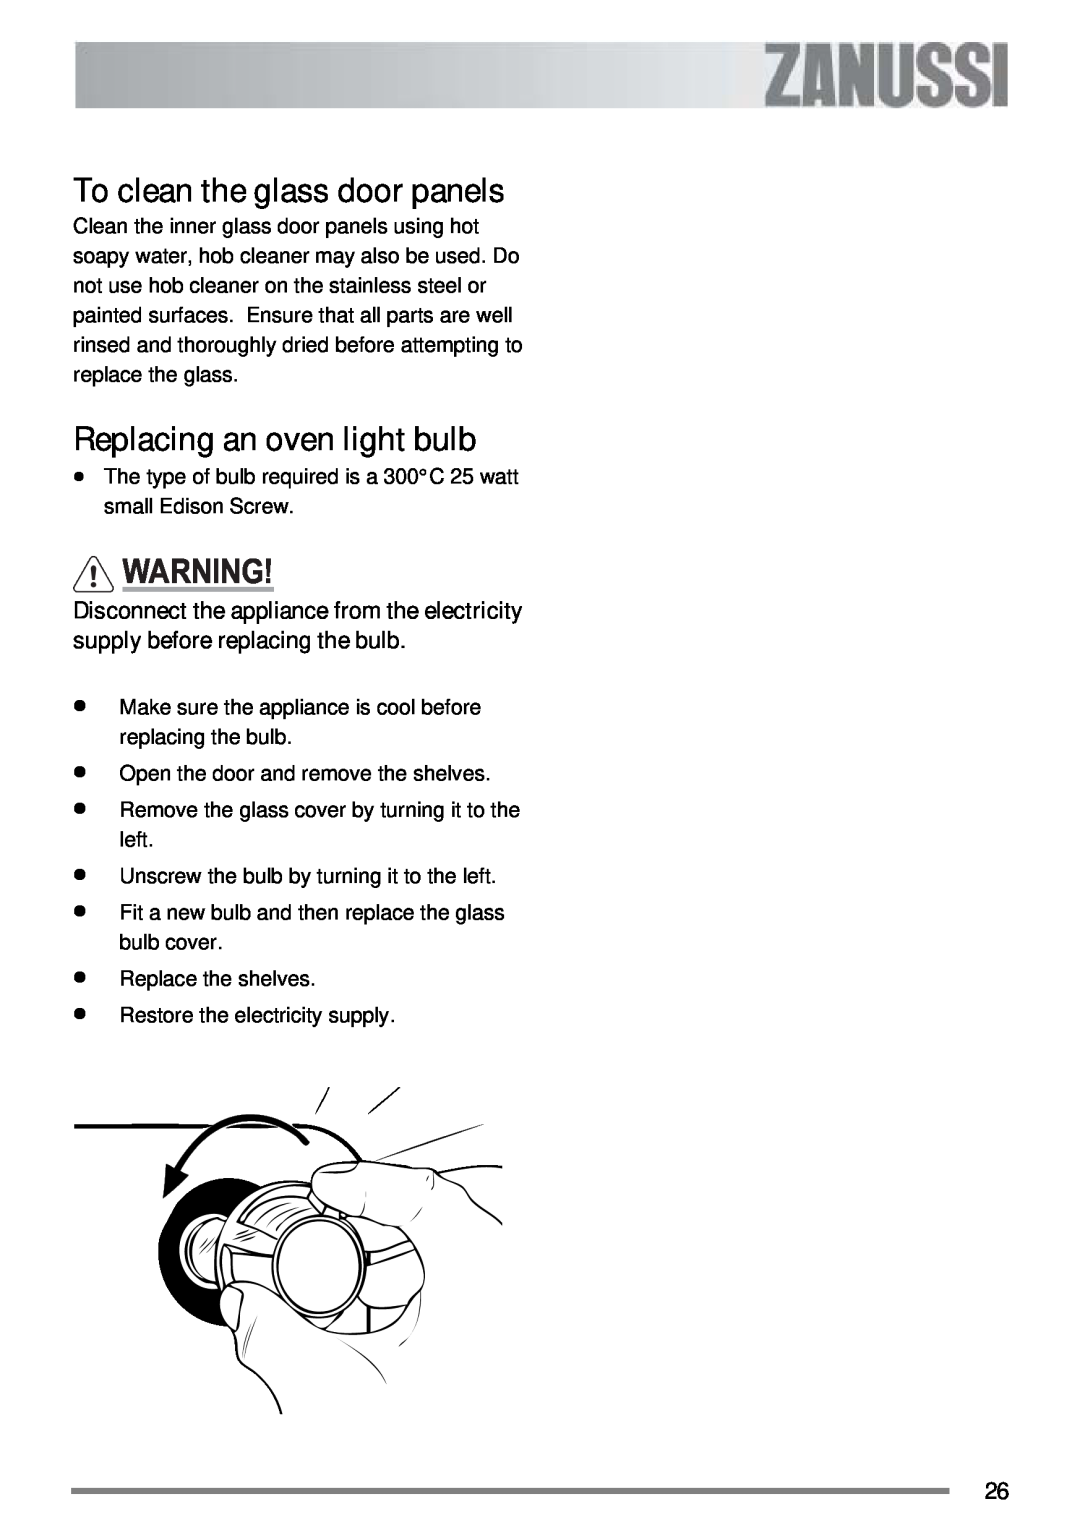 Zanussi ZKC 6000W user manual To clean the glass door panels, Replacing an oven light bulb 